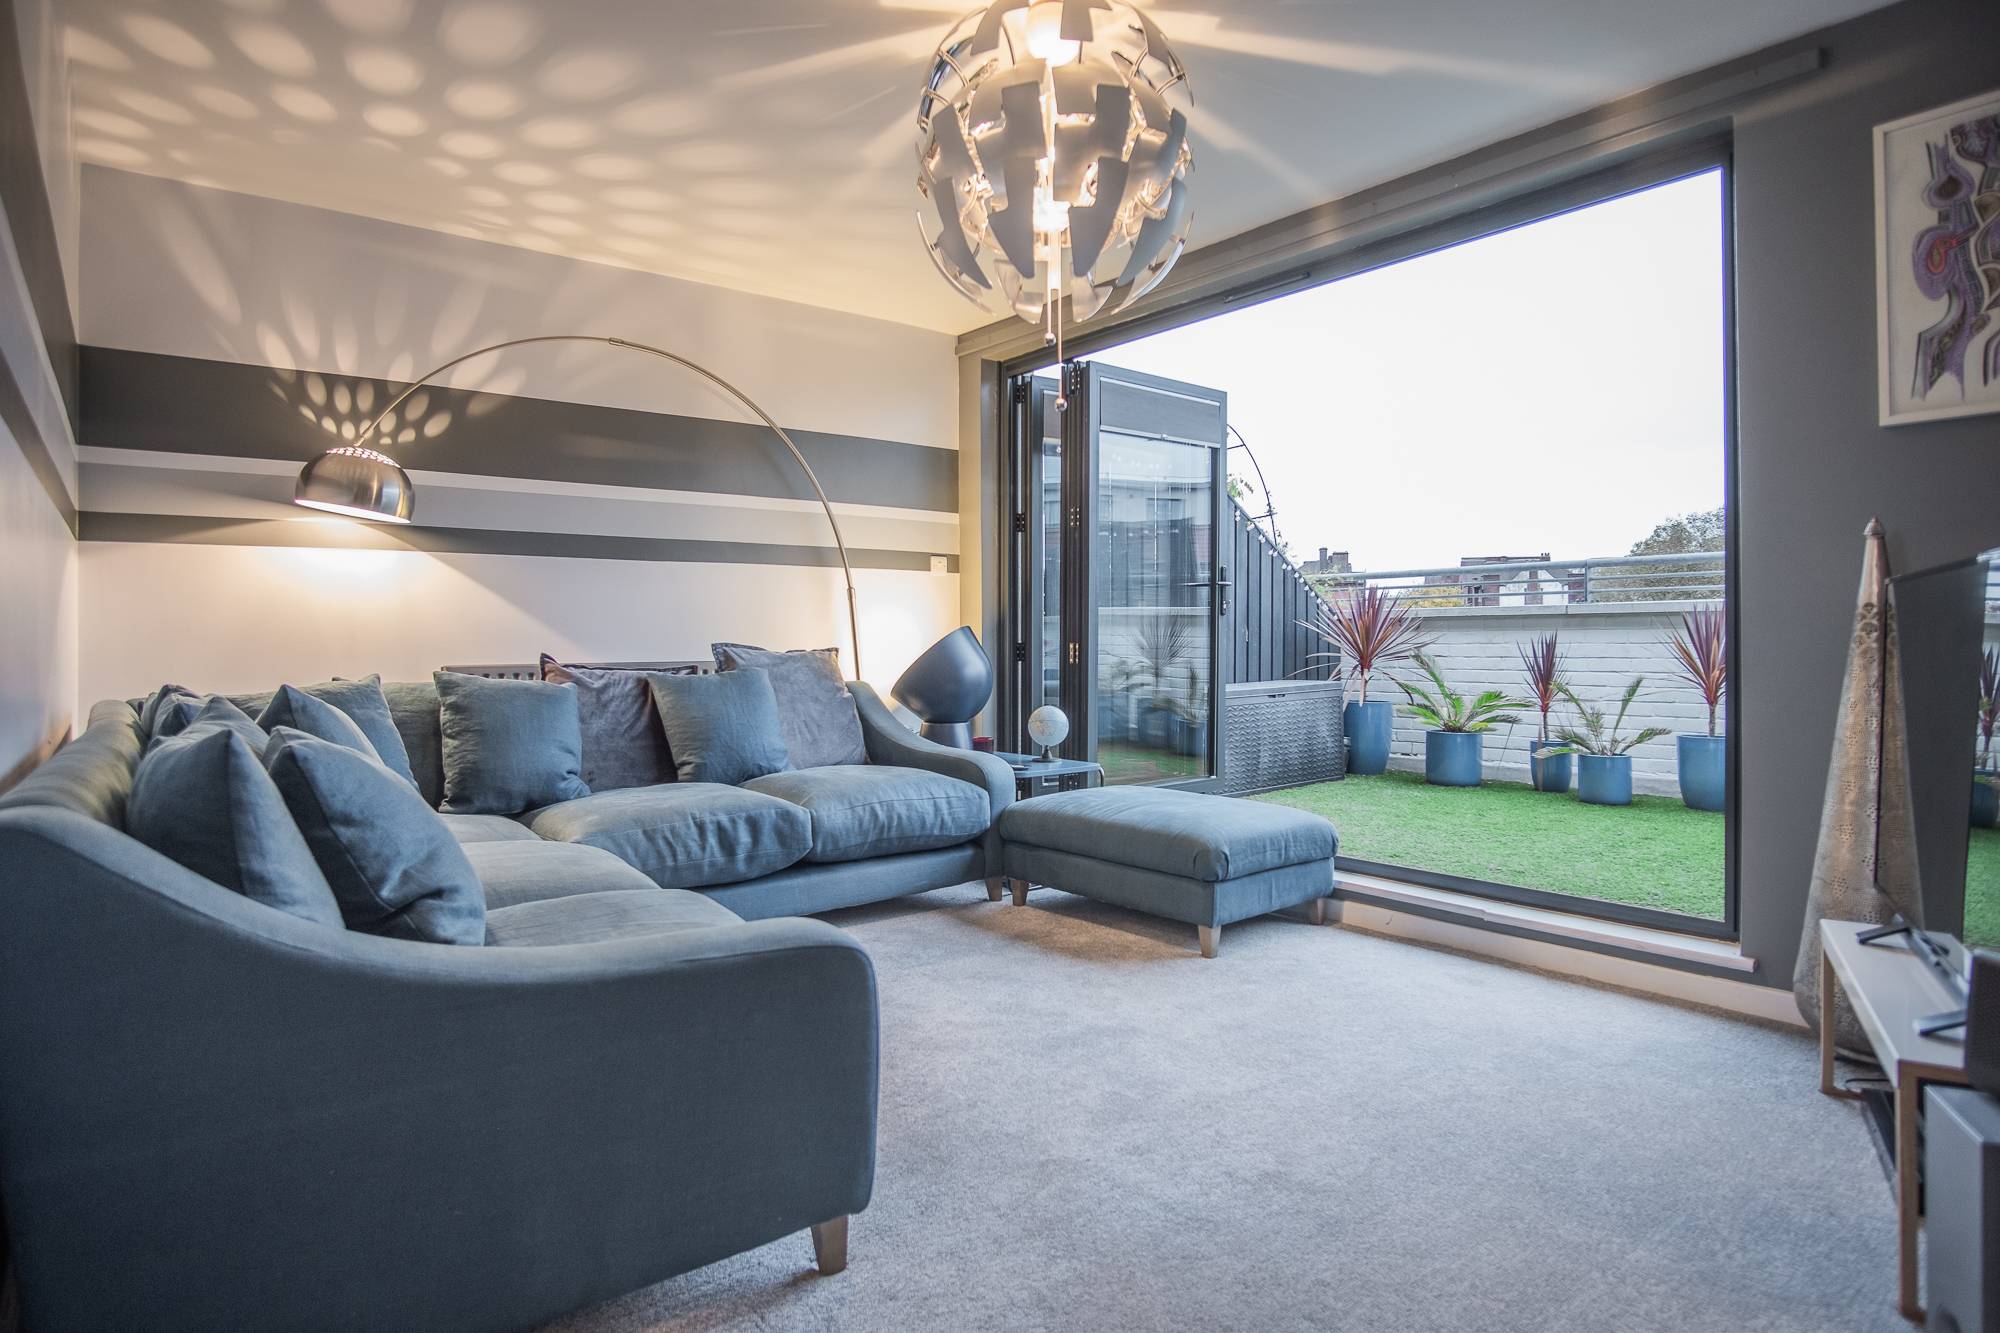 The apartment benefits from plenty of private outdoor space as well as open sky views. Proximity to Parks and squares is surely a great amenity this property offers.